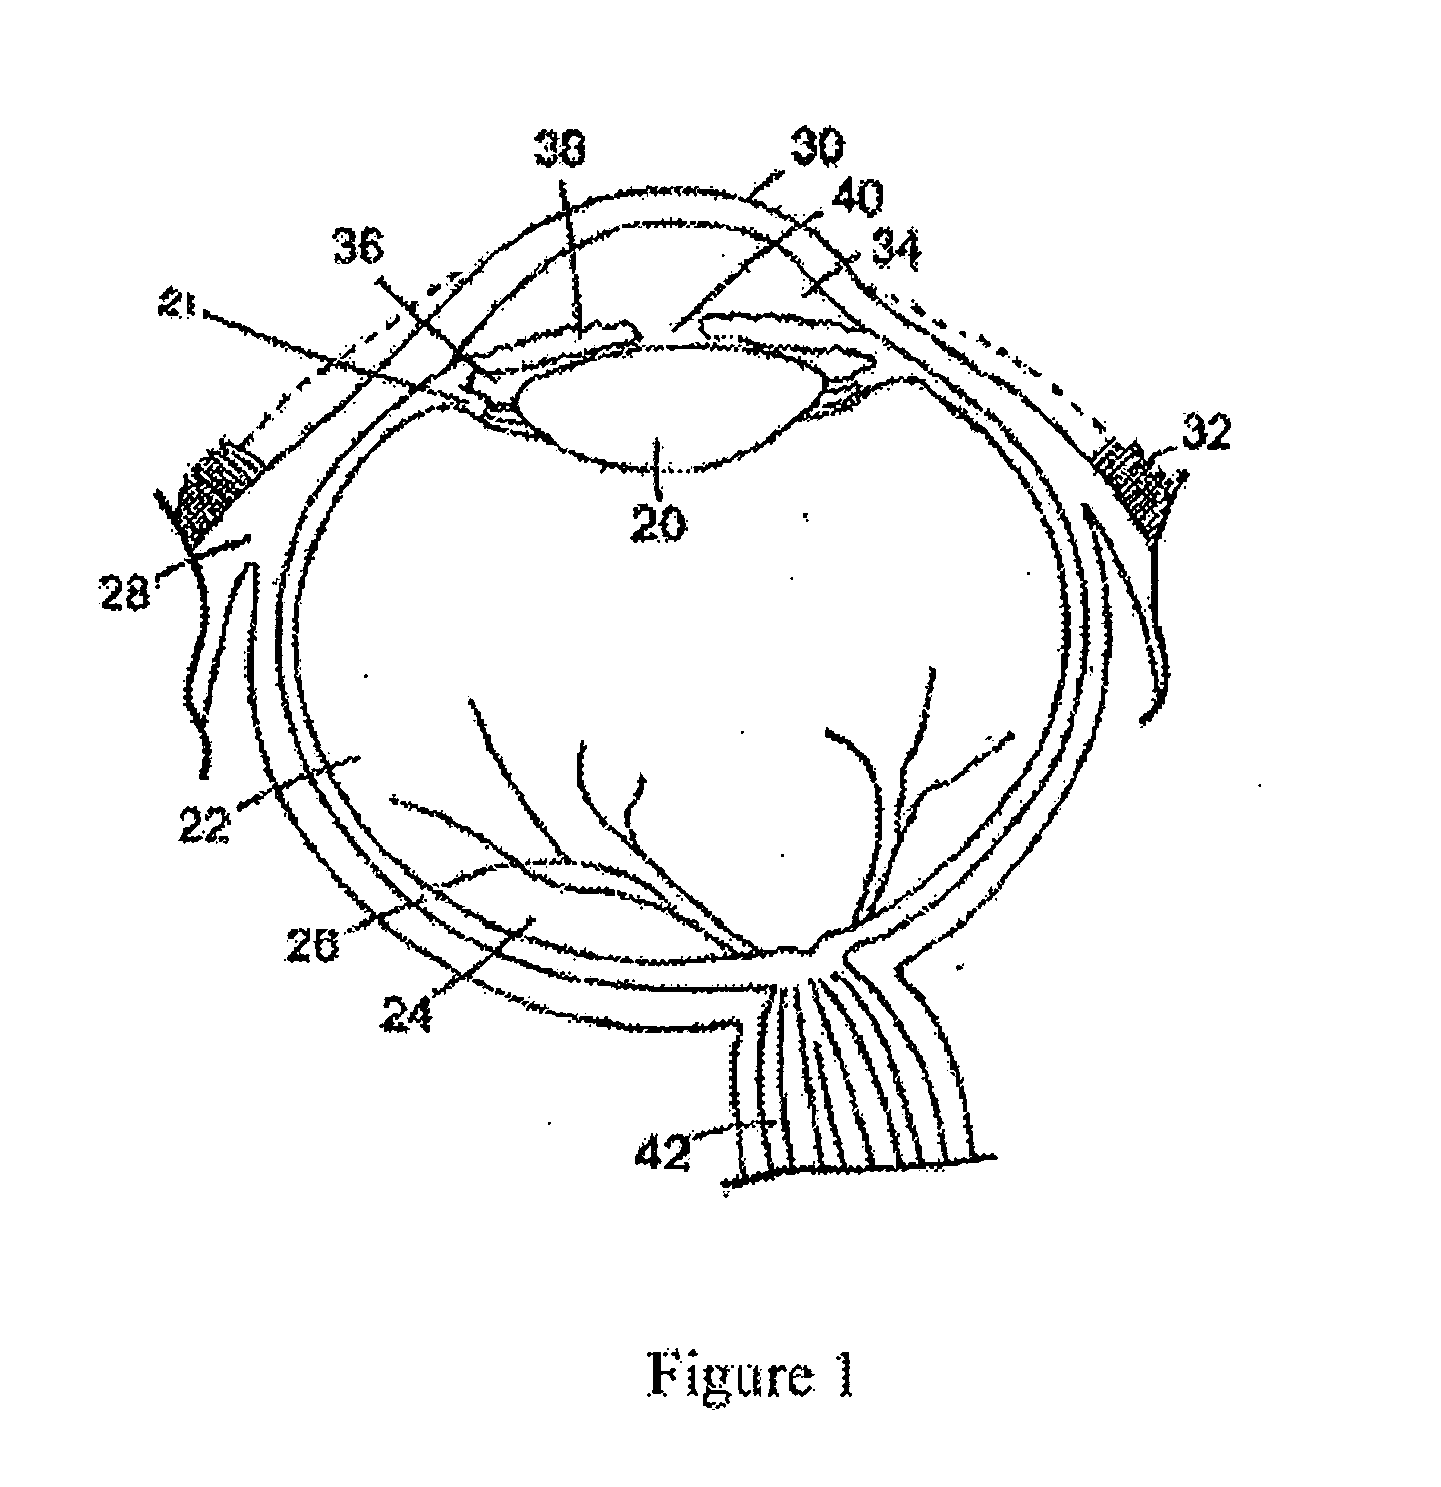 Biodegradable ocular implants and methods for treating ocular conditions